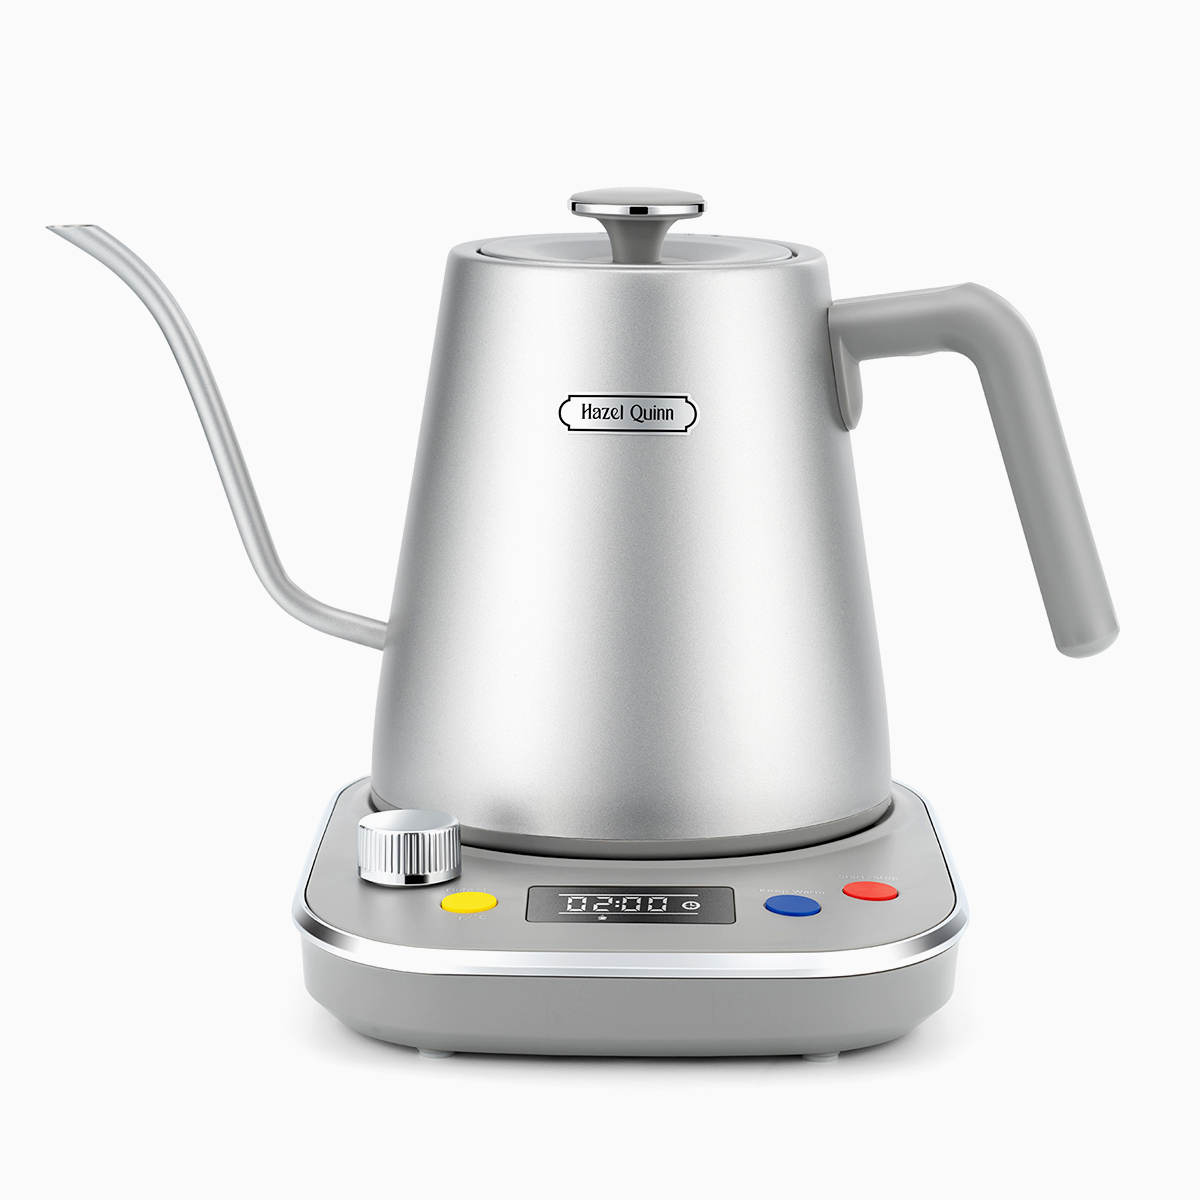 Hazel Quinn Electric Water Kettle with Thermometer Dial, Fast Boil, 1.7 L